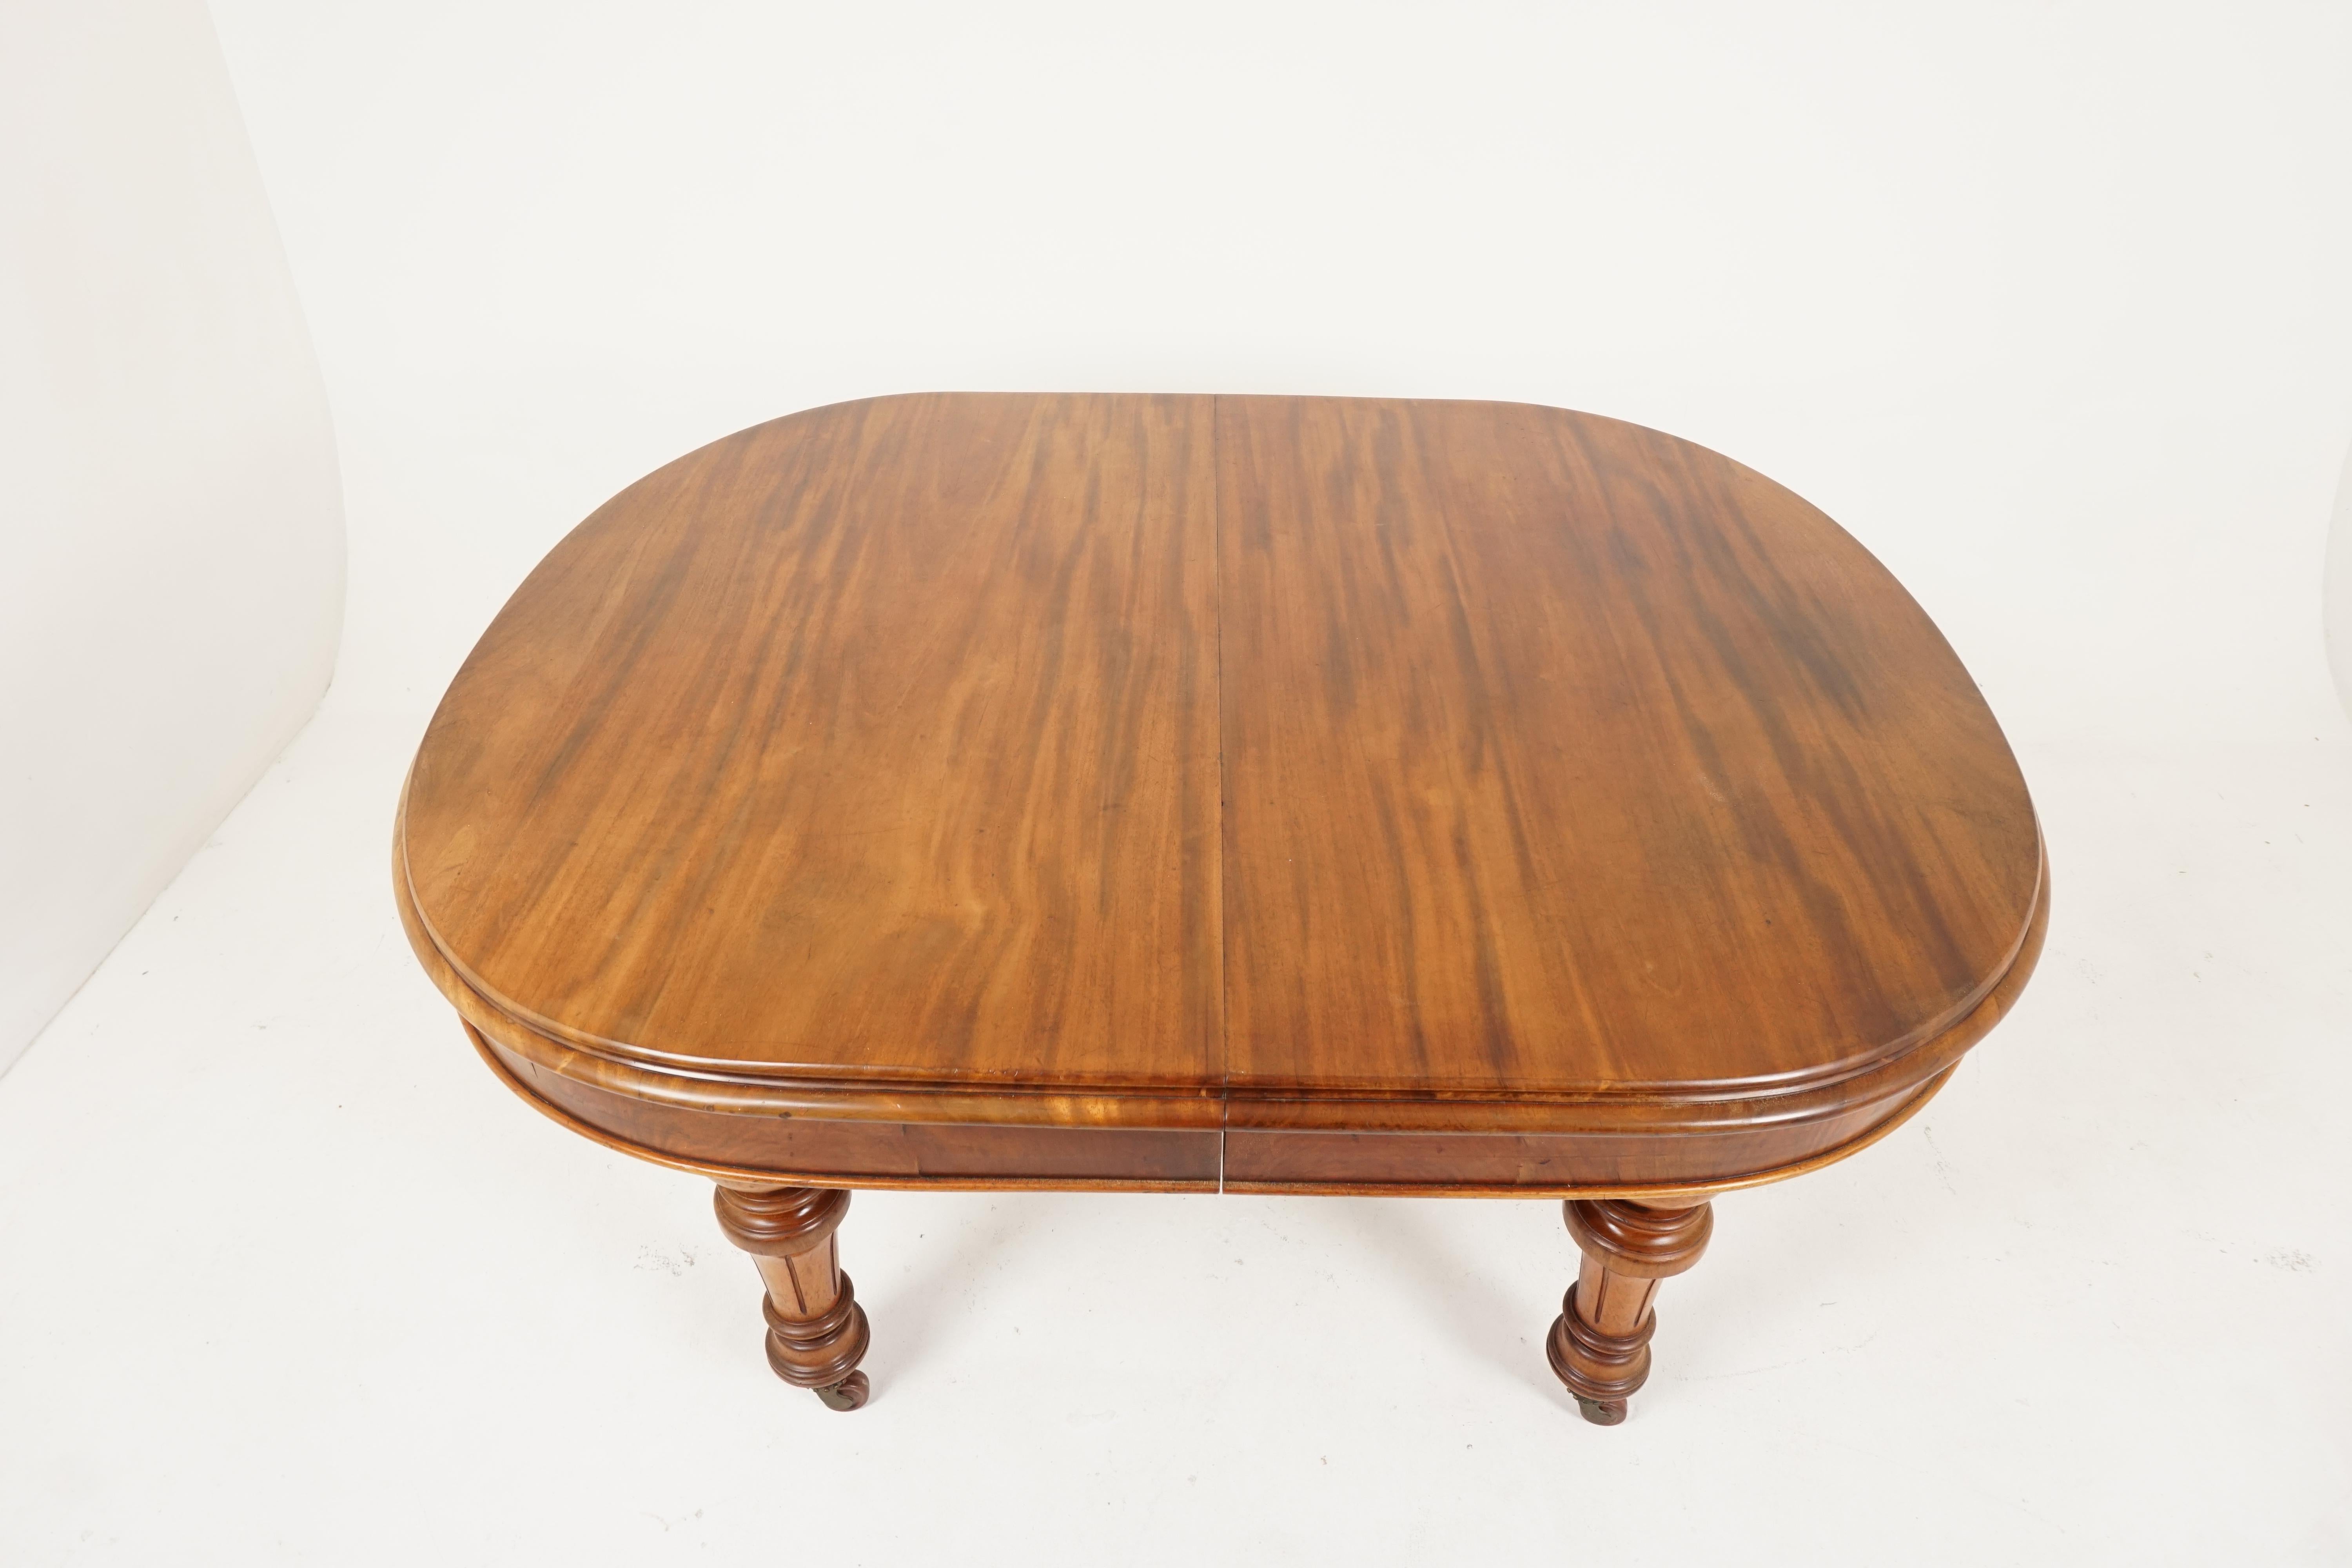 Hand-Crafted Antique Victorian Walnut Extending Dining Table with 2 Leaves, Scotland, 1880